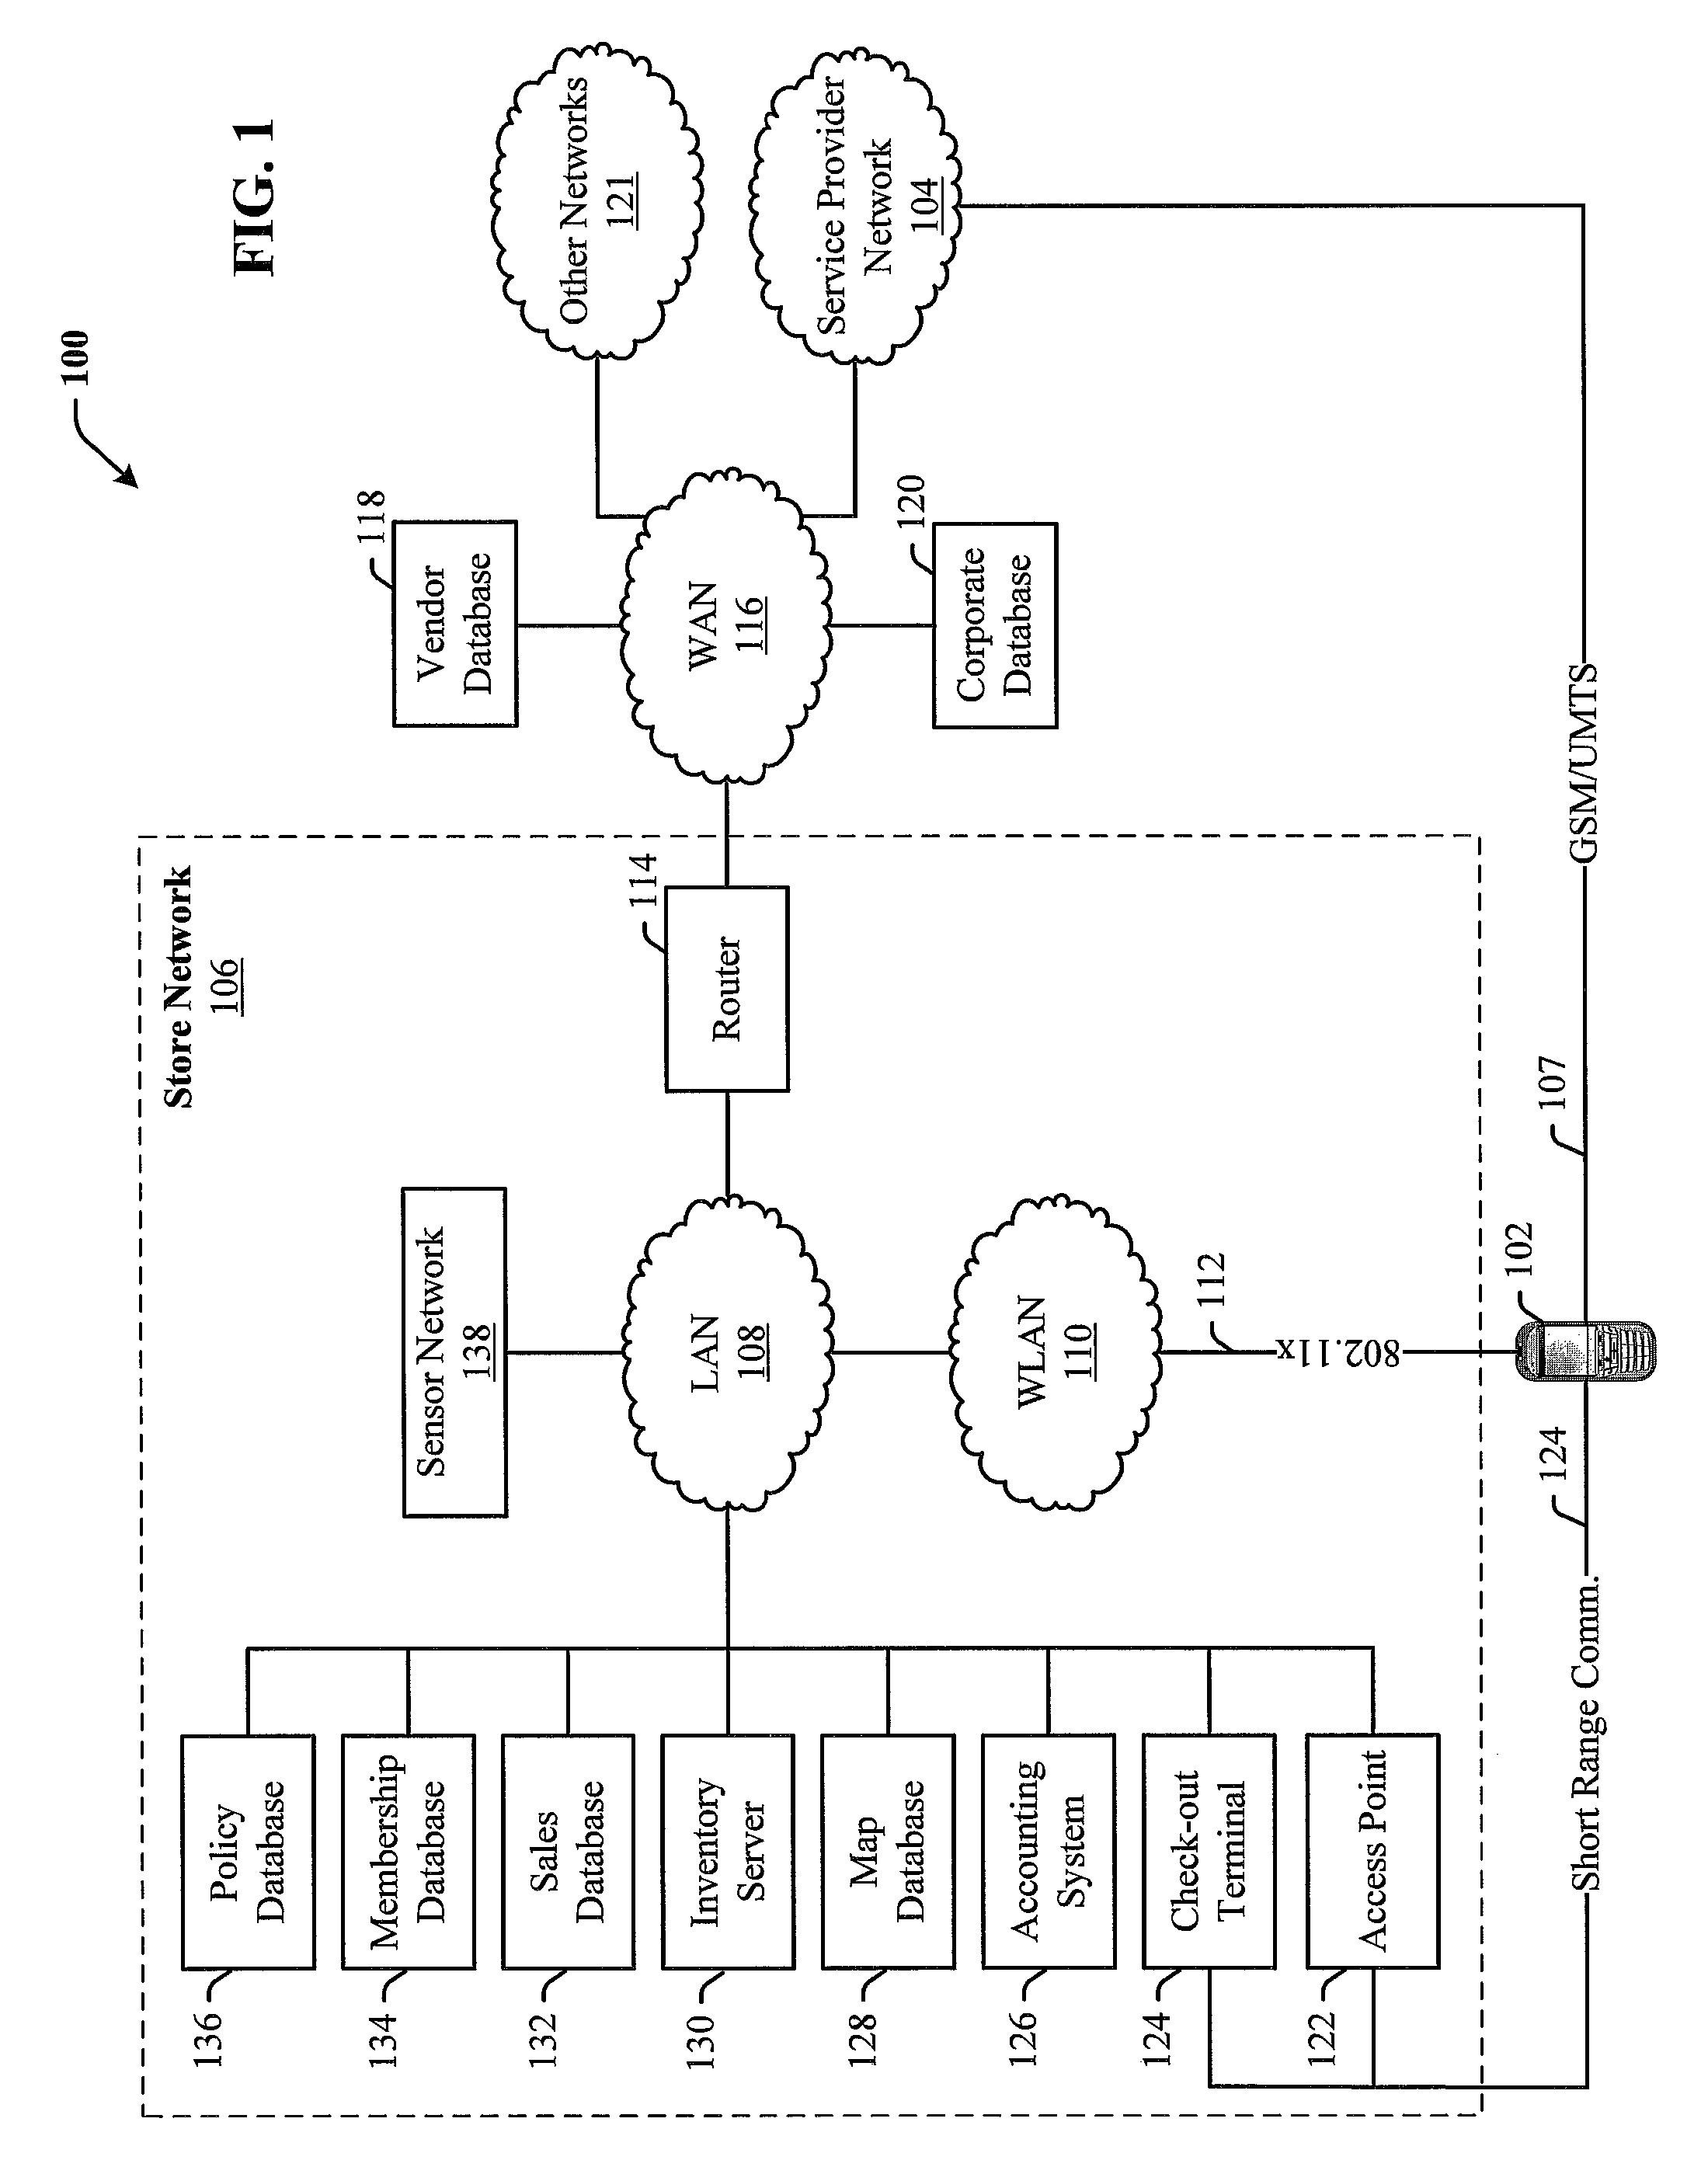 Network systems and methods utilizing mobile devices to enhance consumer experience